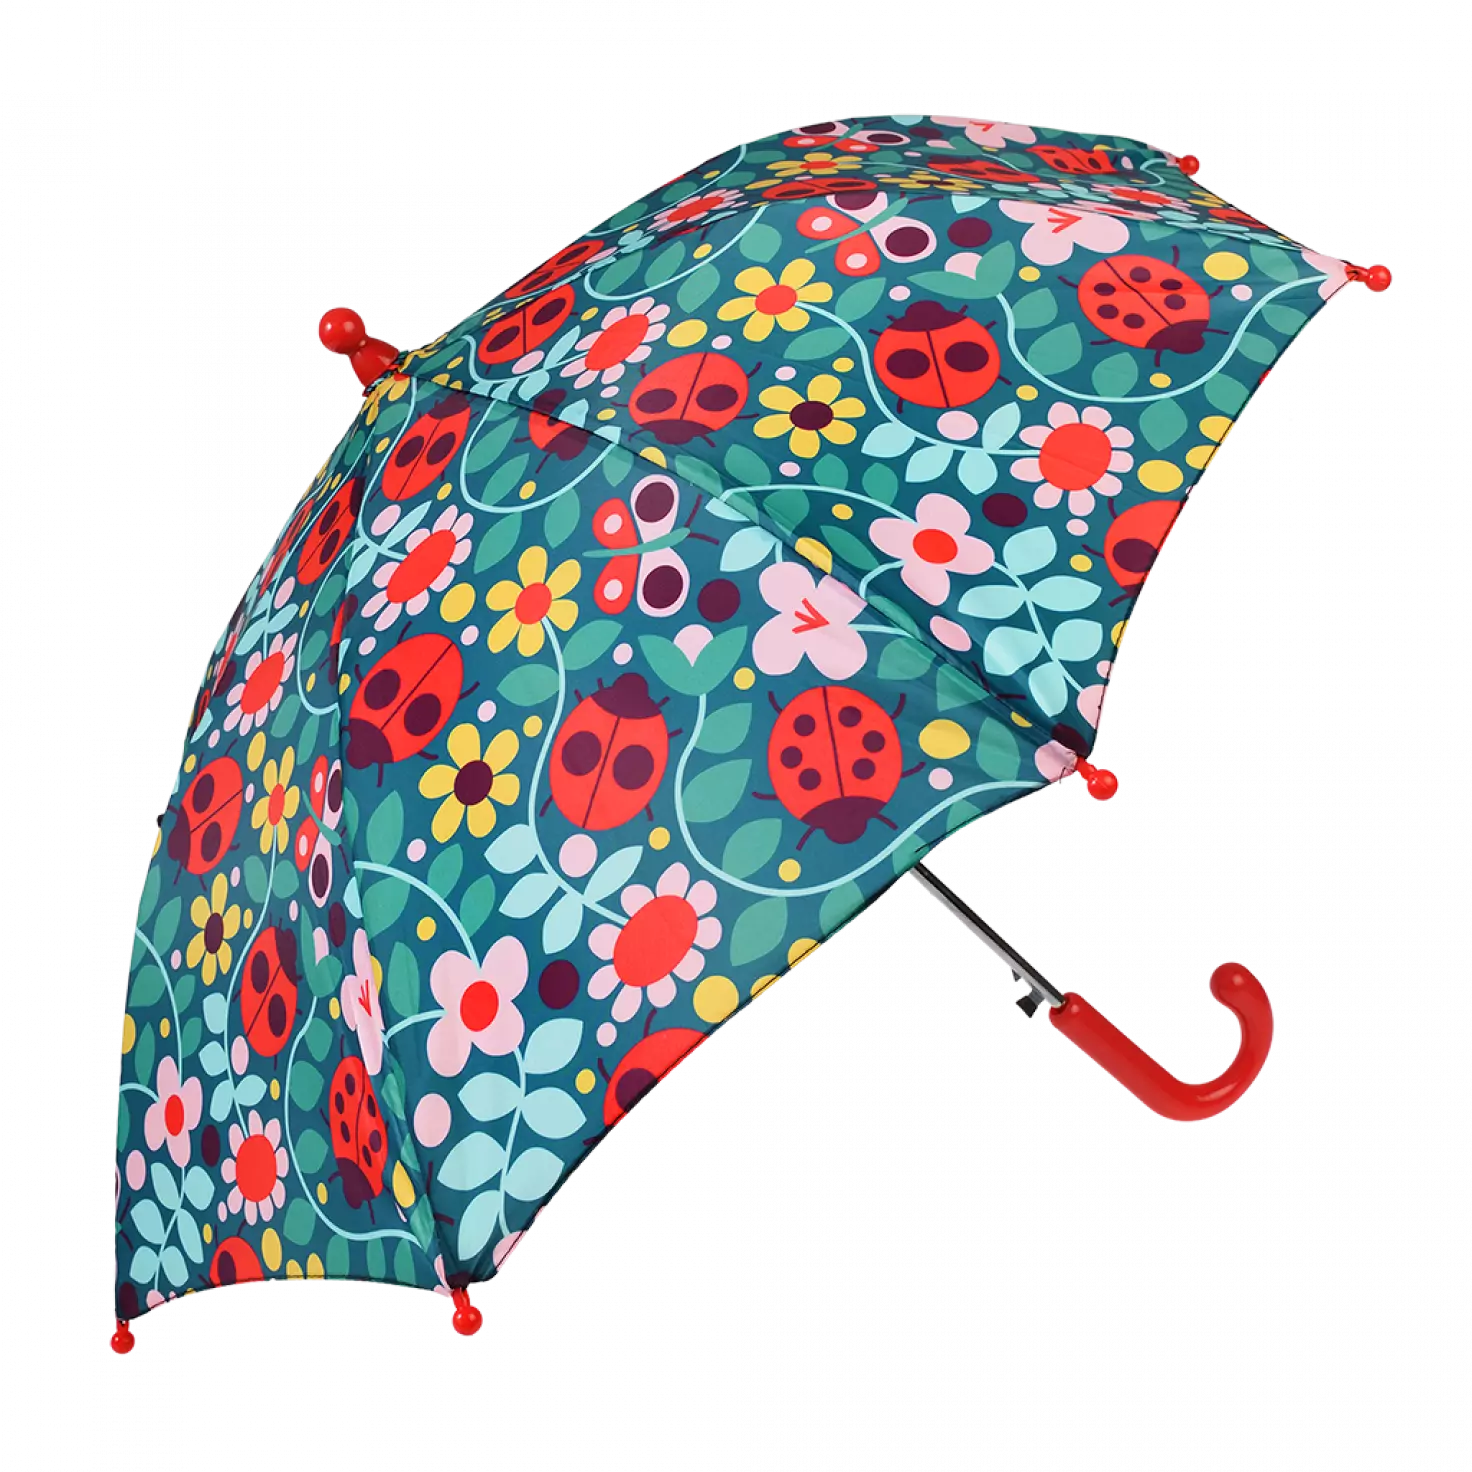 A childs umbrella by Rex London, style Ladybird, in blue with multi ladybird and floral print and red handle. Angled view of umbrella open.